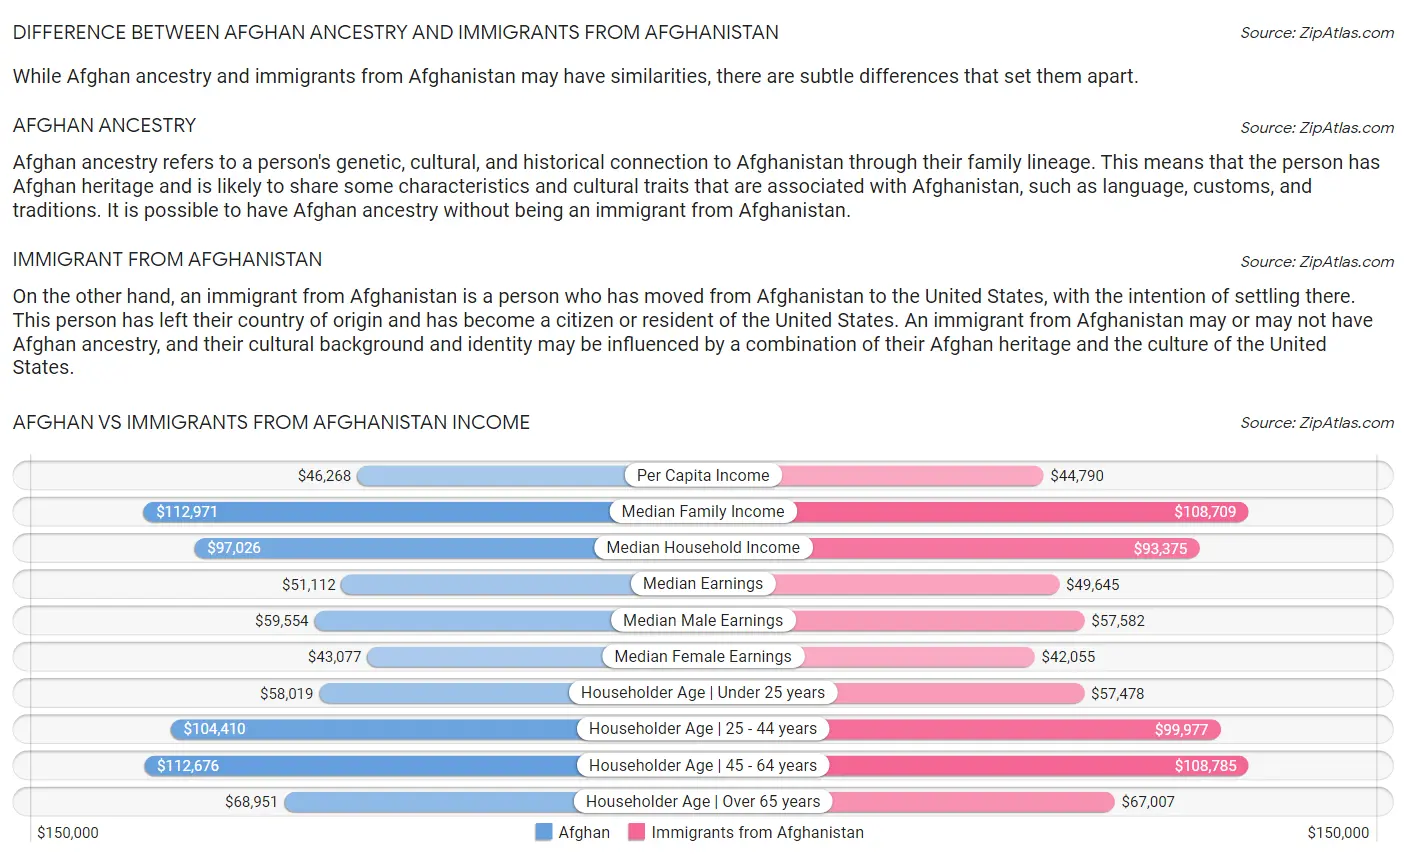 Afghan vs Immigrants from Afghanistan Income